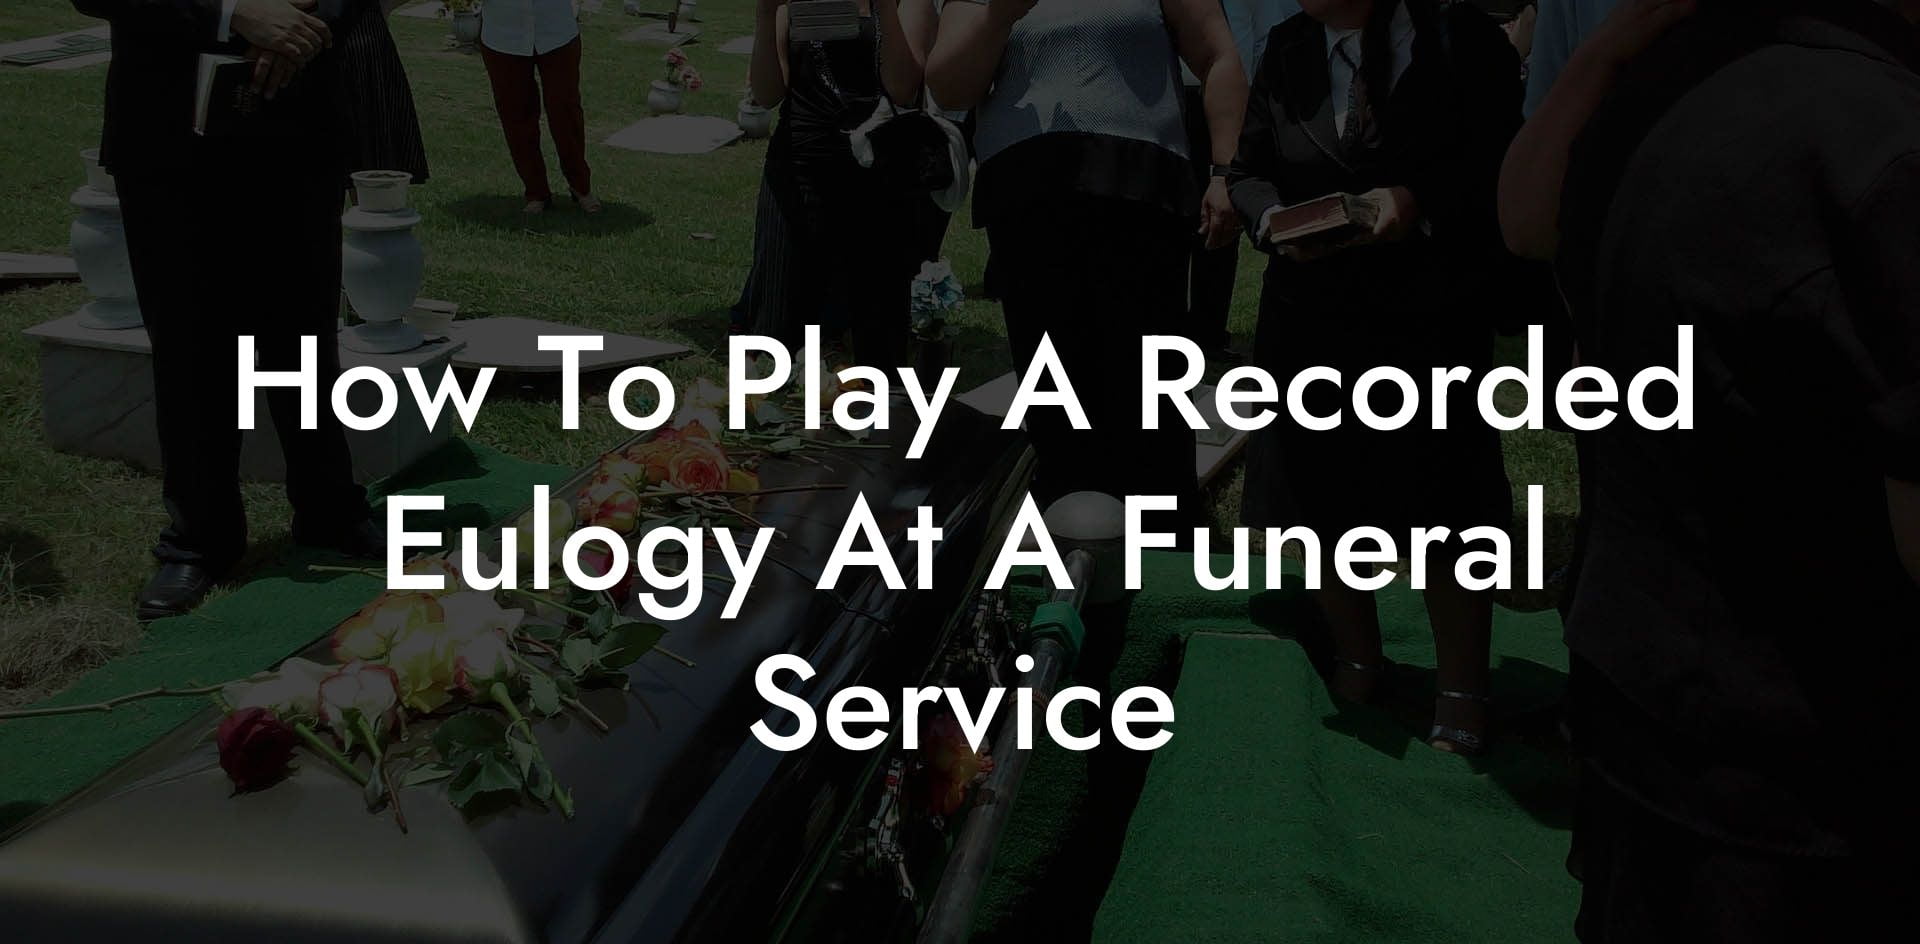 How To Play A Recorded Eulogy At A Funeral Service